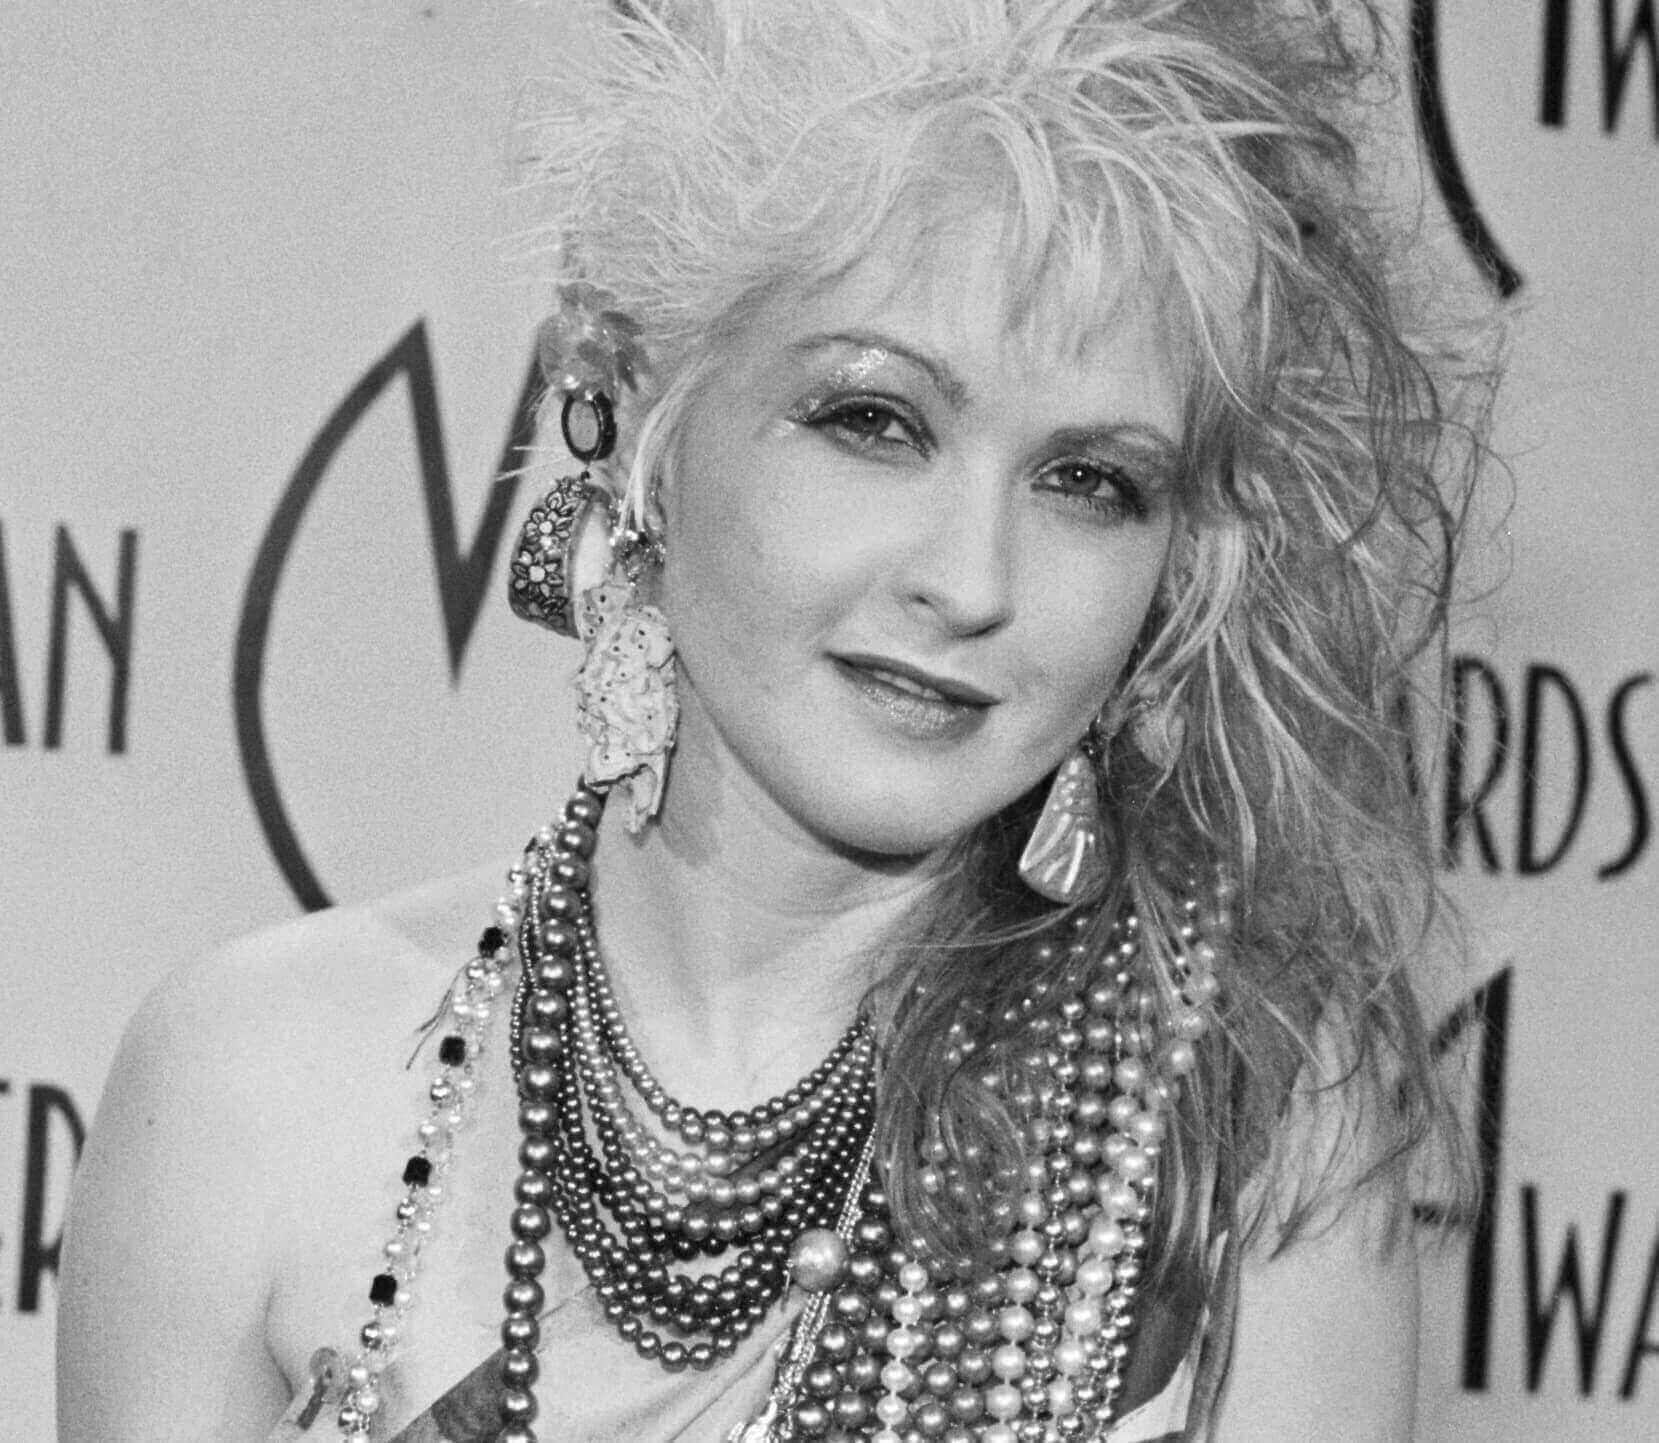 "True Colors" singer Cyndi Lauper in black-and-white